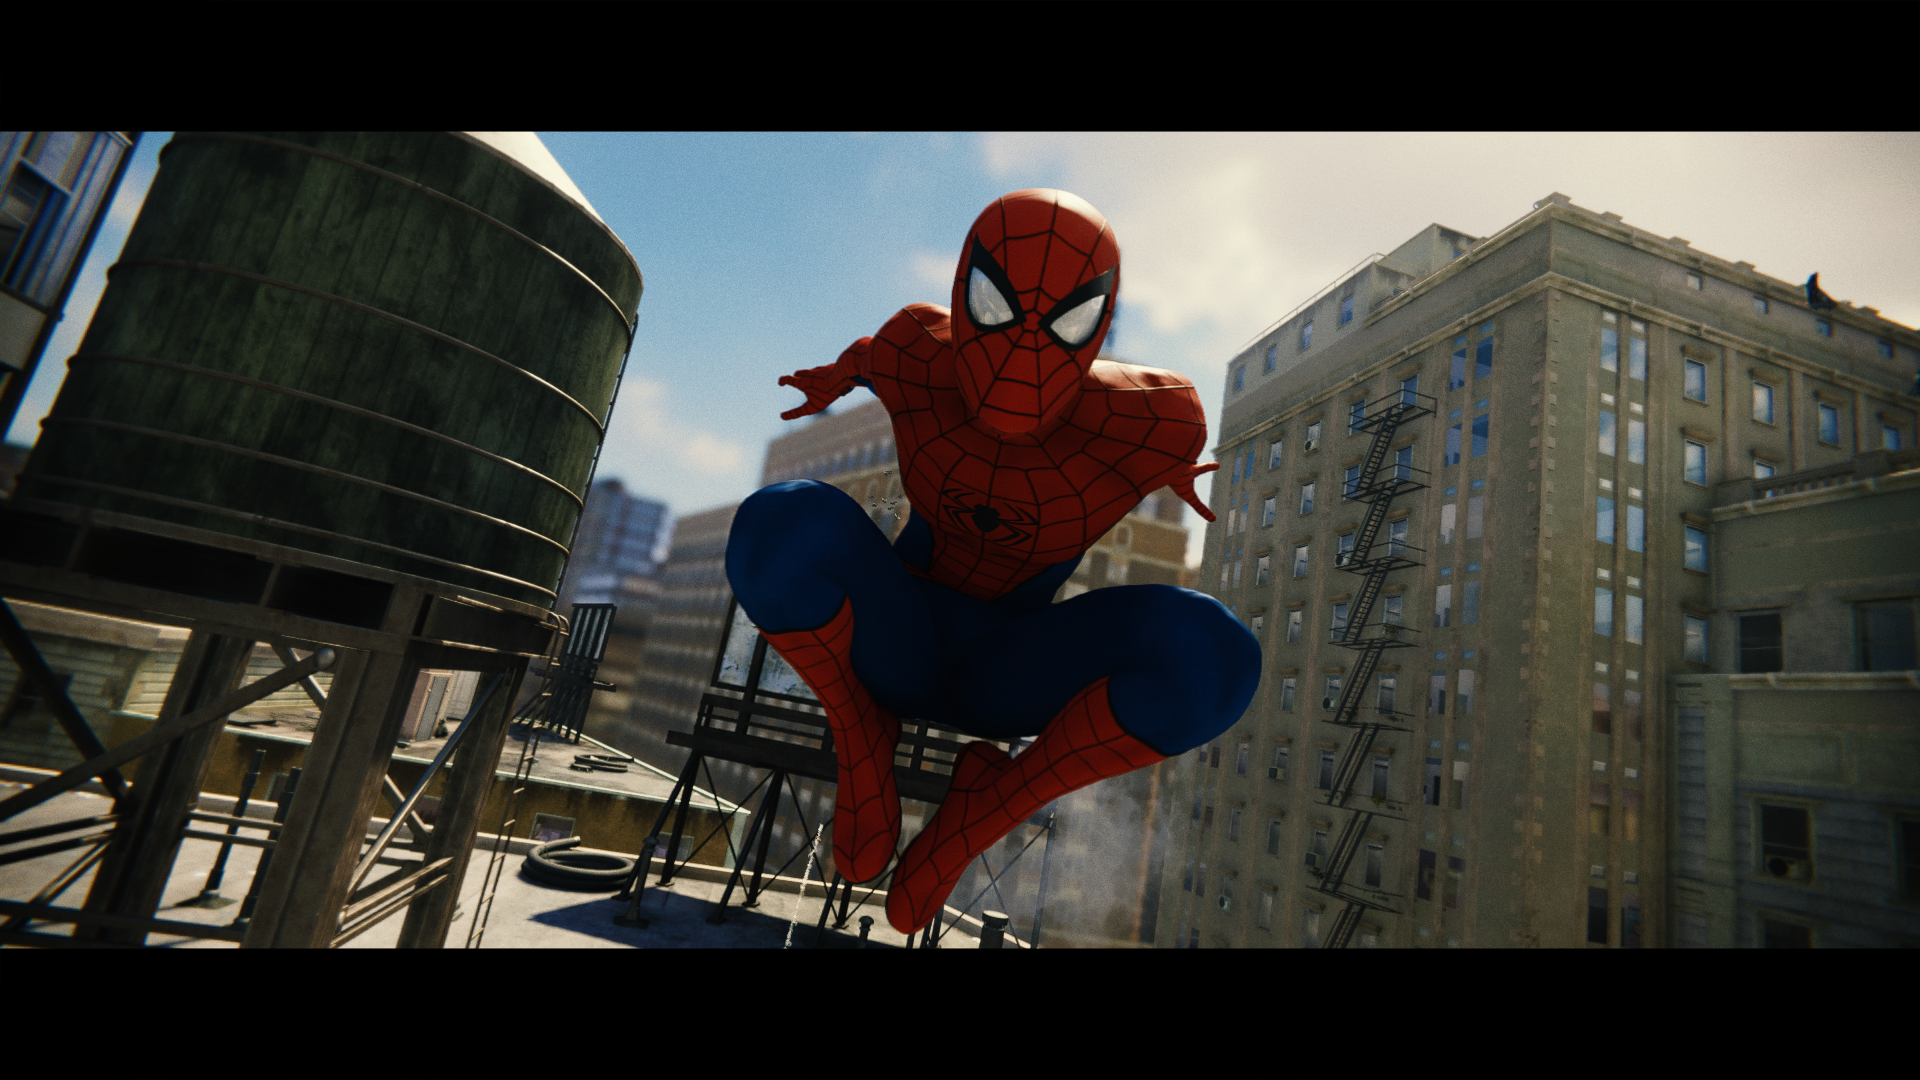 spider_man_ps4___forward_by_thebmz-dcmngpi.png